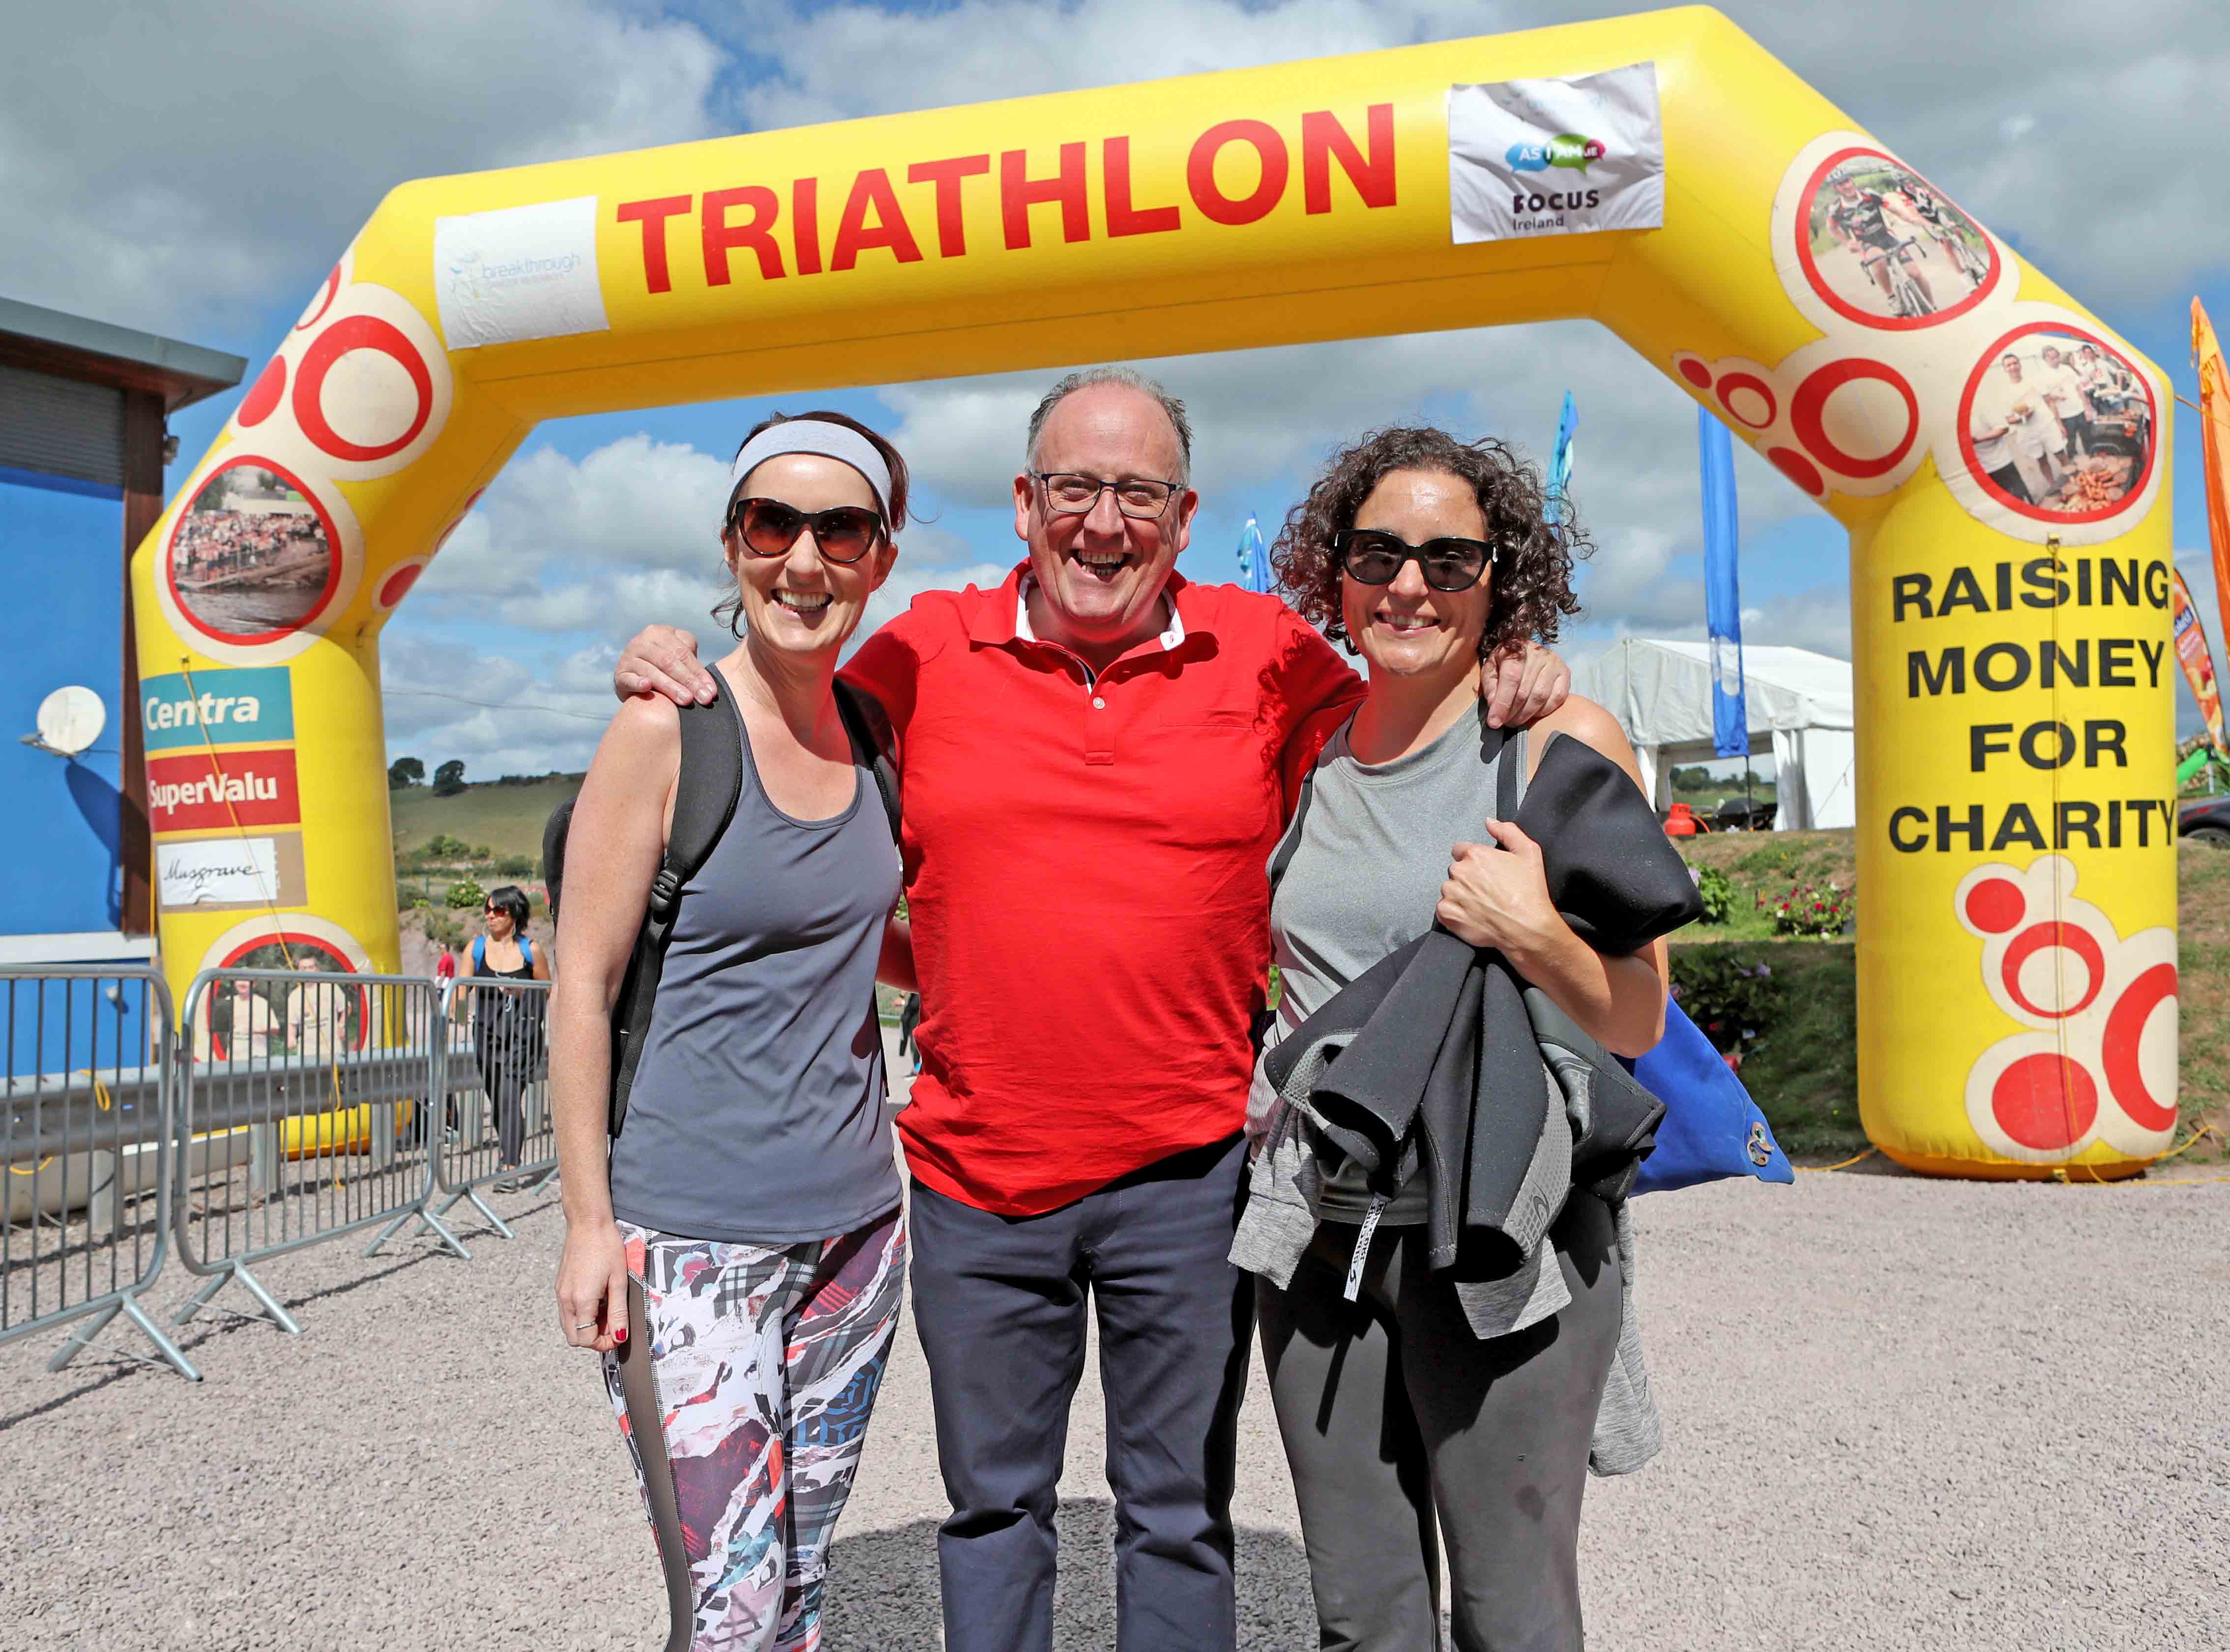 REPRO FREE.25/08/20182018 Musgrave Triathlon, at Farran Wood, Farran, Co. Cork.Established in 2002 the Musgrave Triathlon is an annual charity fundraiser event. Since its inception a staggering €4.4 million has been raised for charity. This year the three charities in receipt of the much-needed funds raised are Breakthrough Cancer Research, Focus Ireland and AsIAm.  Picture: Jim Coughlan.